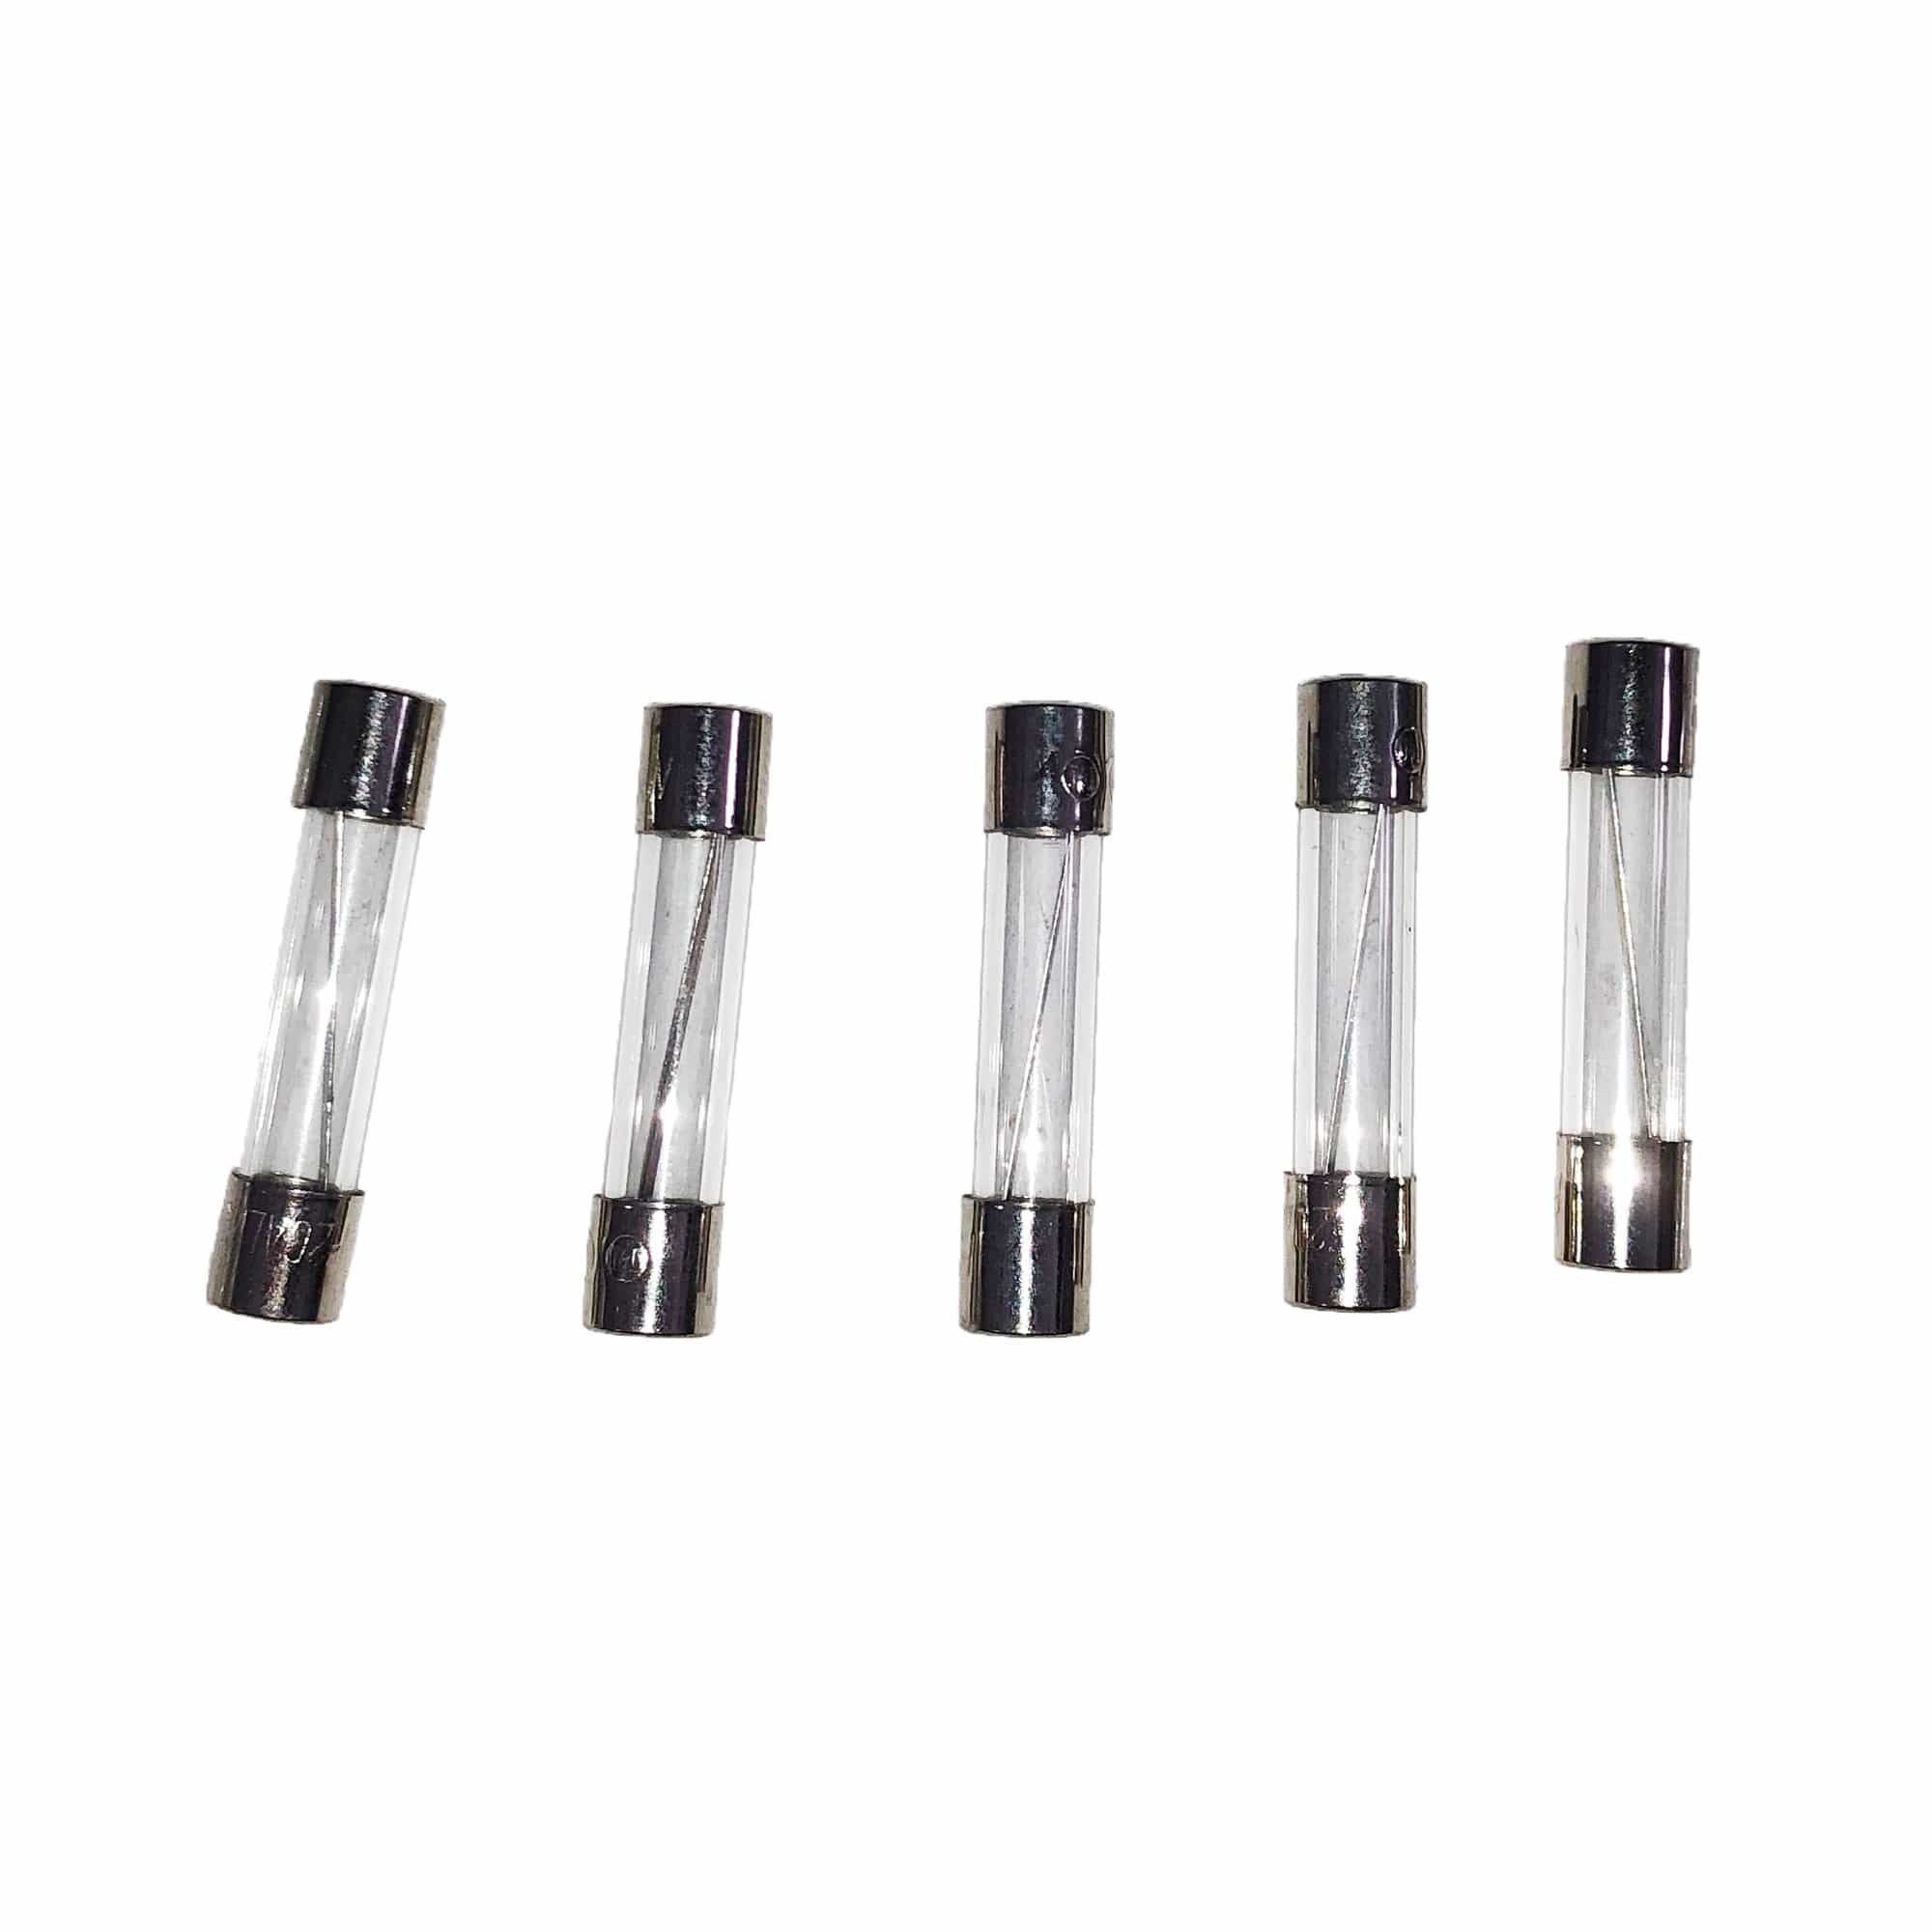 PowerBright F8A 8 Amp Glass Fuse 5 Pack